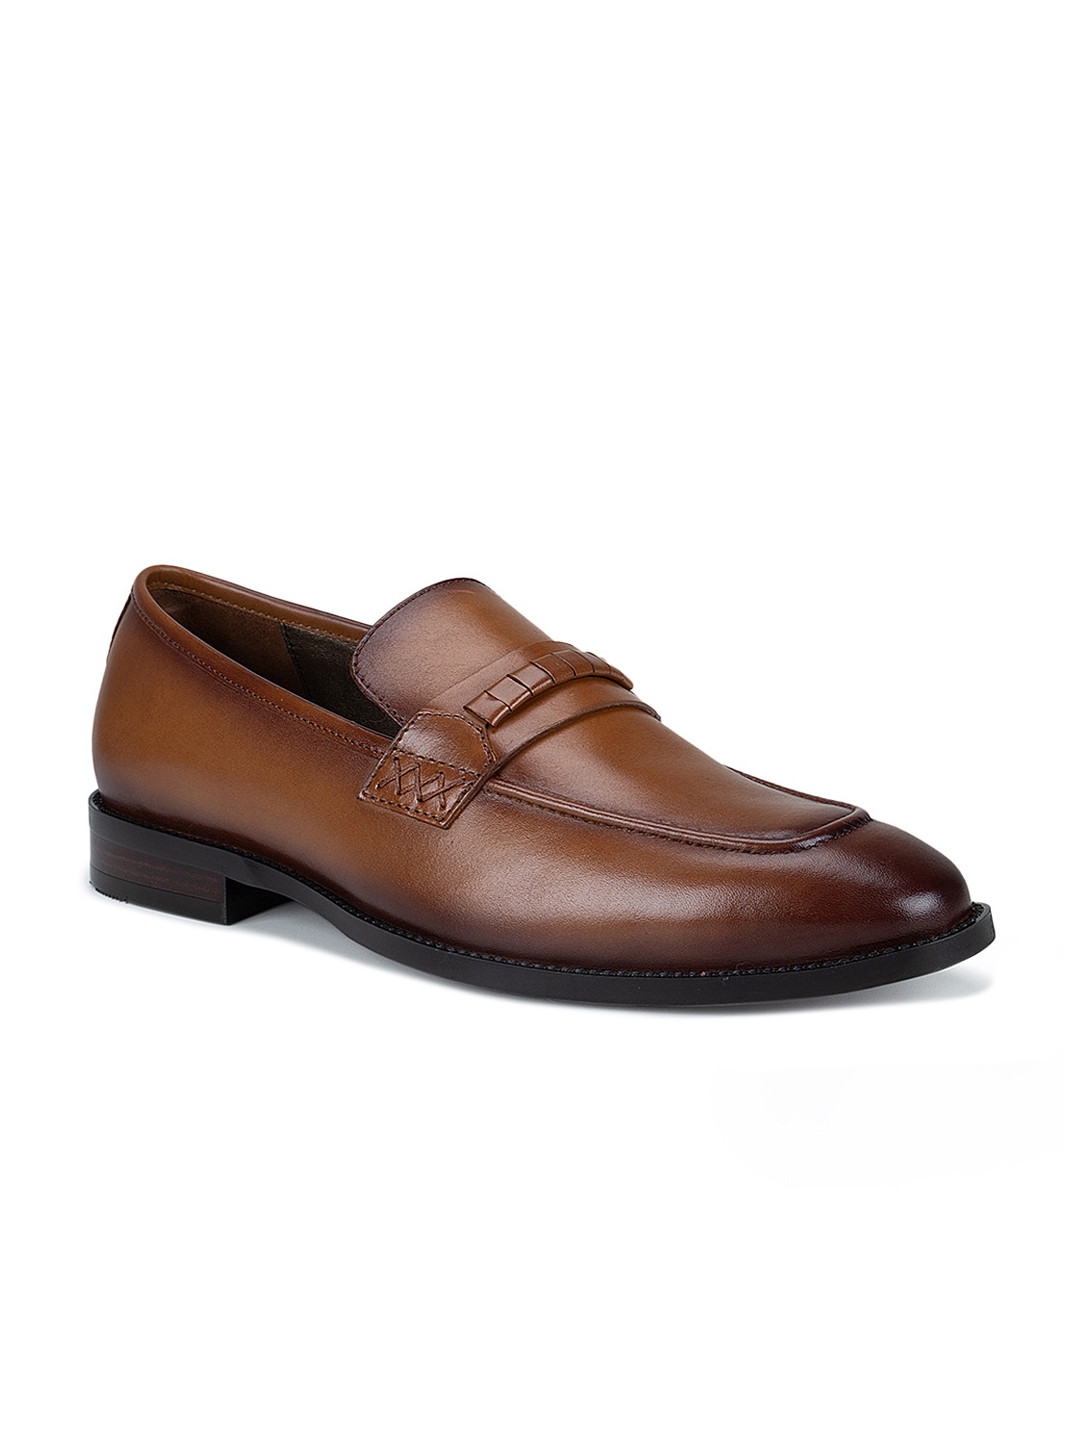 Buy ROSSO BRUNELLO Men Brown Solid Leather Formal Loafers - Formal ...